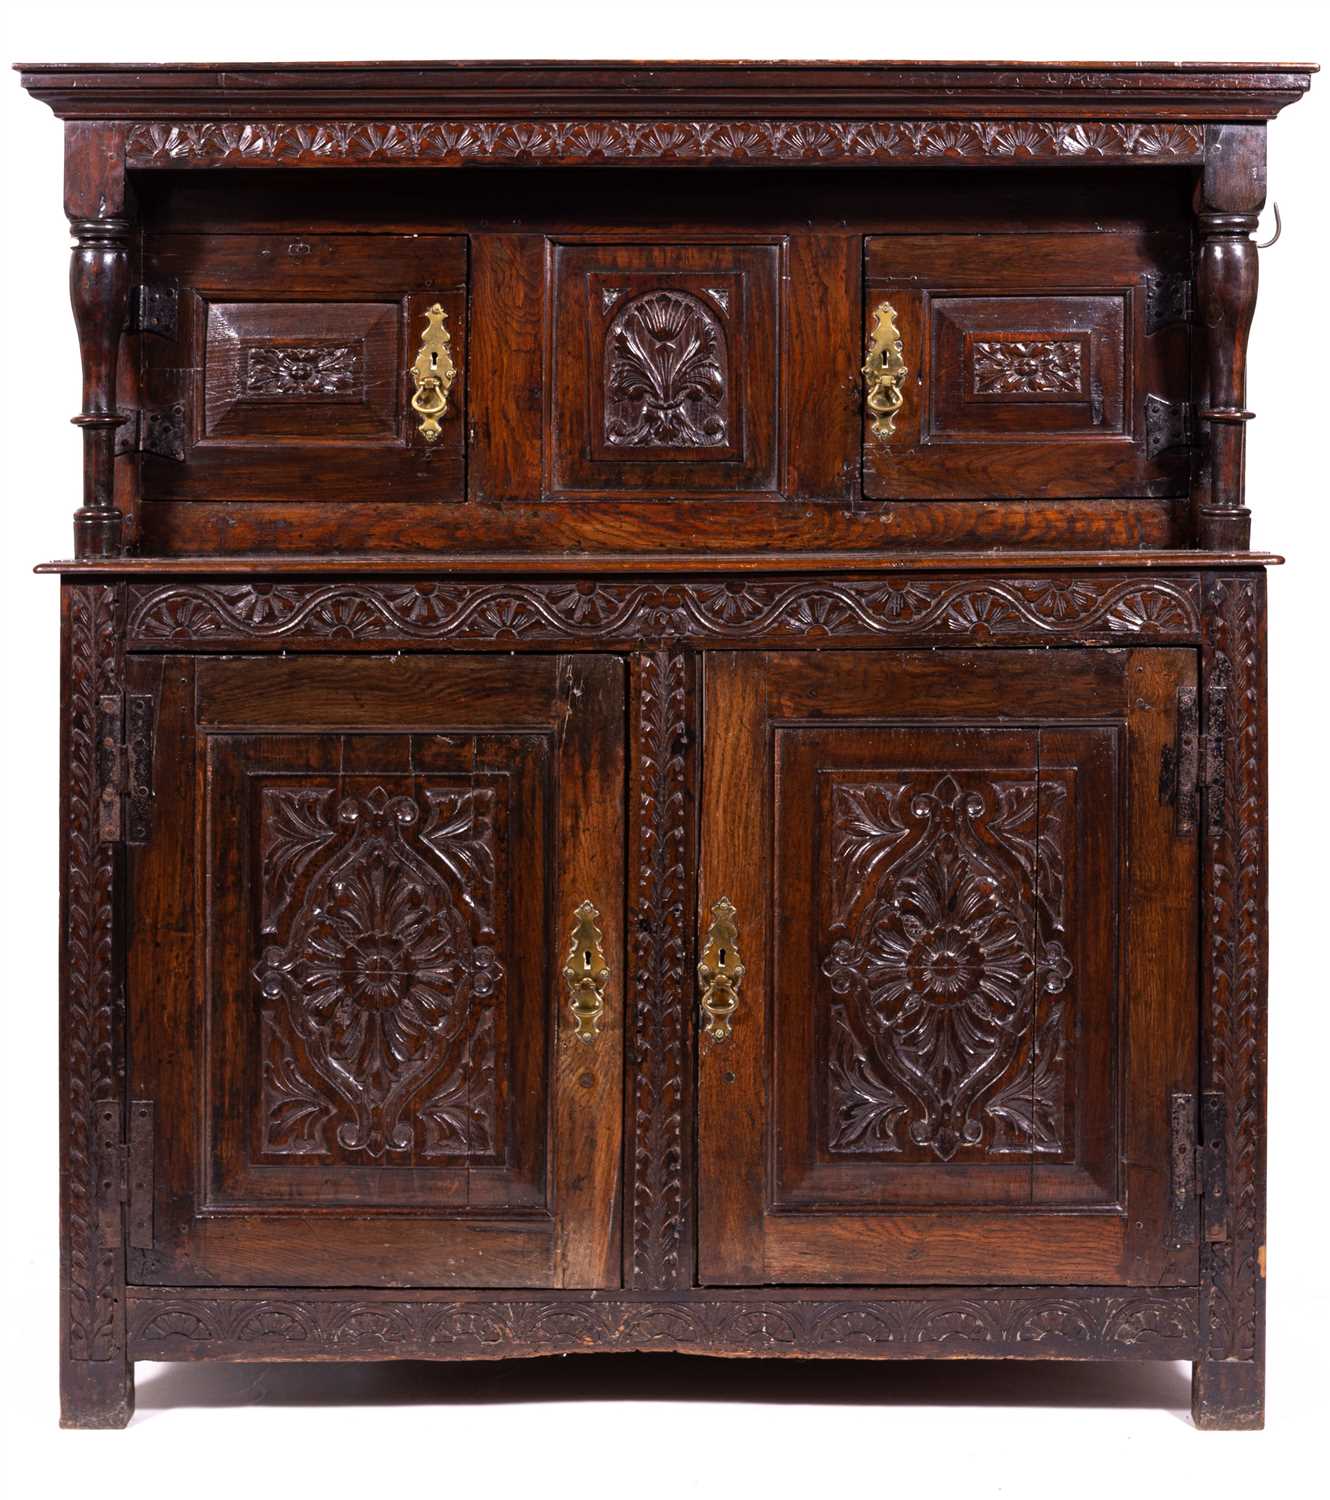 Lot 431 - A joined oak court cupboard, late 17th century and later